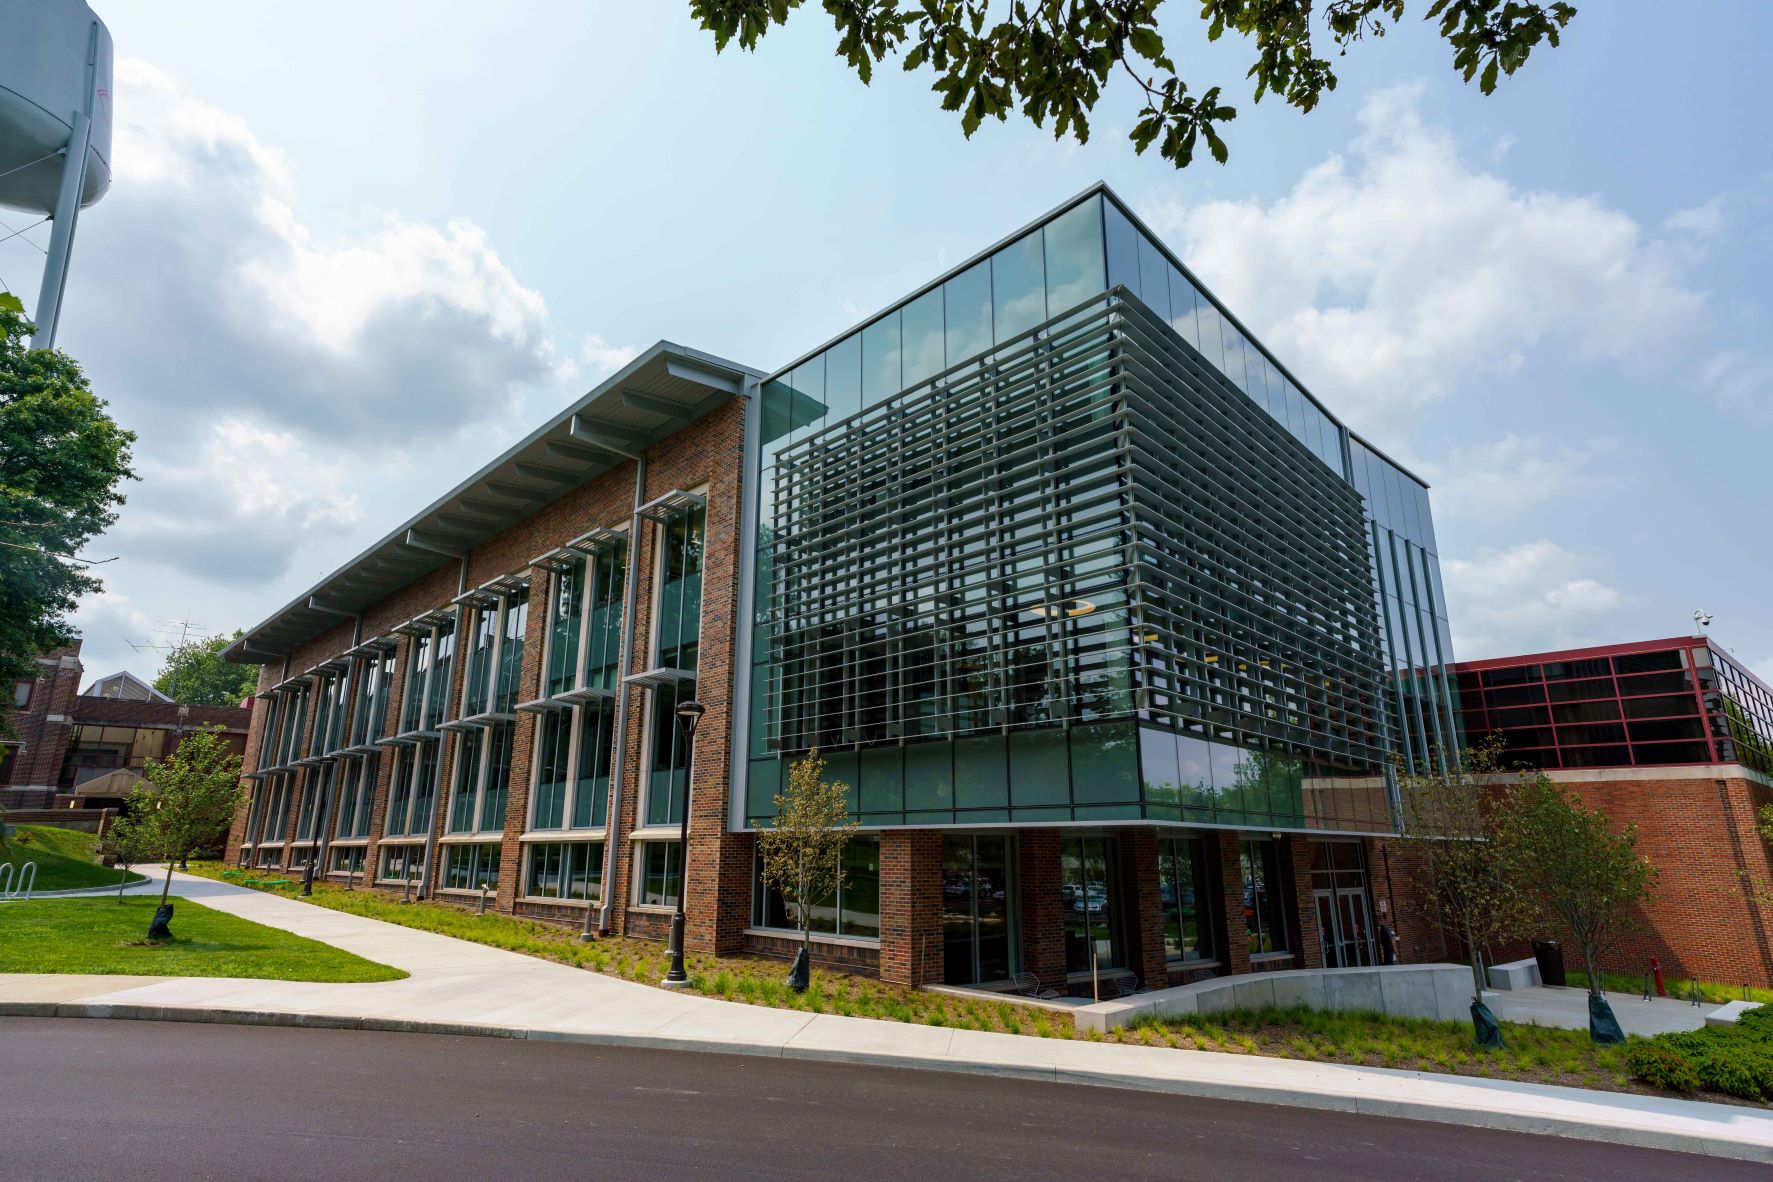 RoseHulman Institute of Technology Ranked Top 20 Nationally in Wall